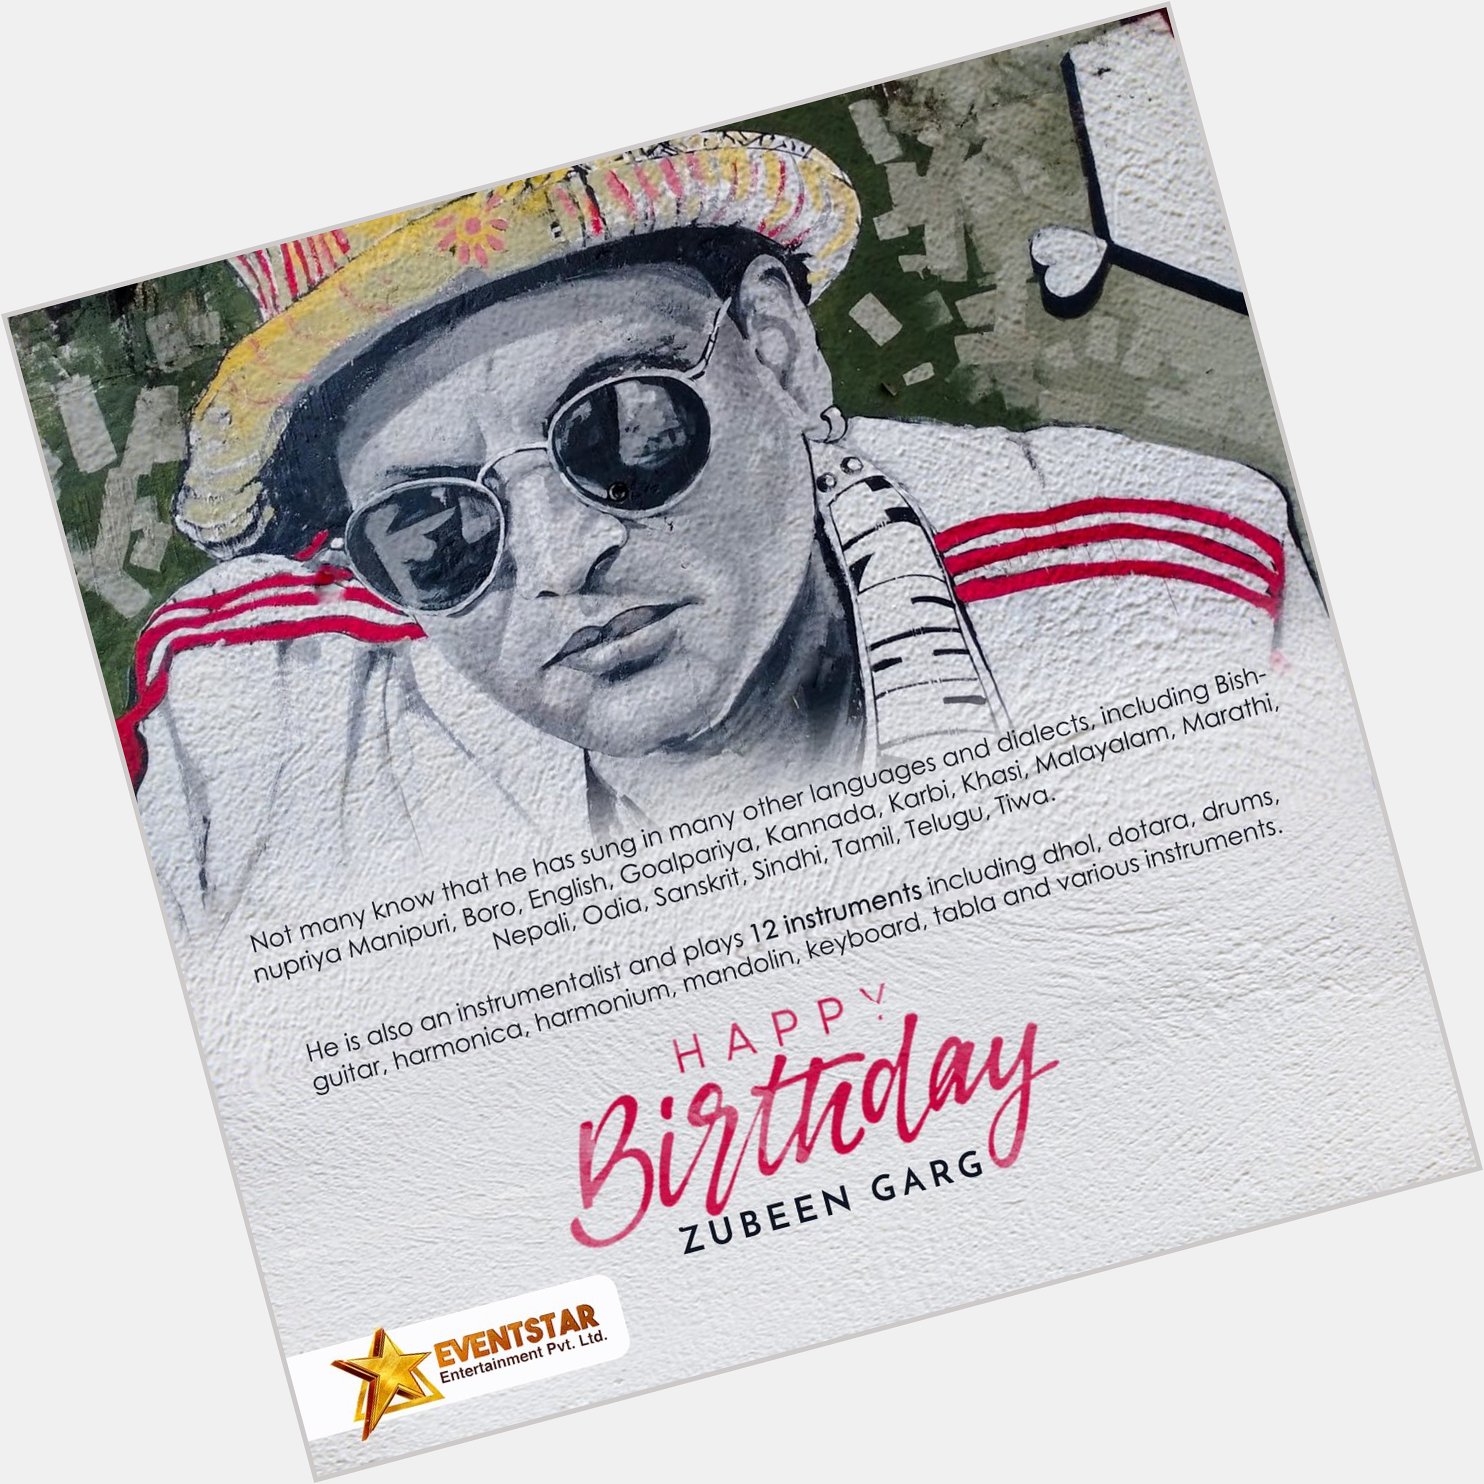 \Happy Birthday Zubeen Garg. You are such a spectacular artist ! Keep shining like a diamond\ 